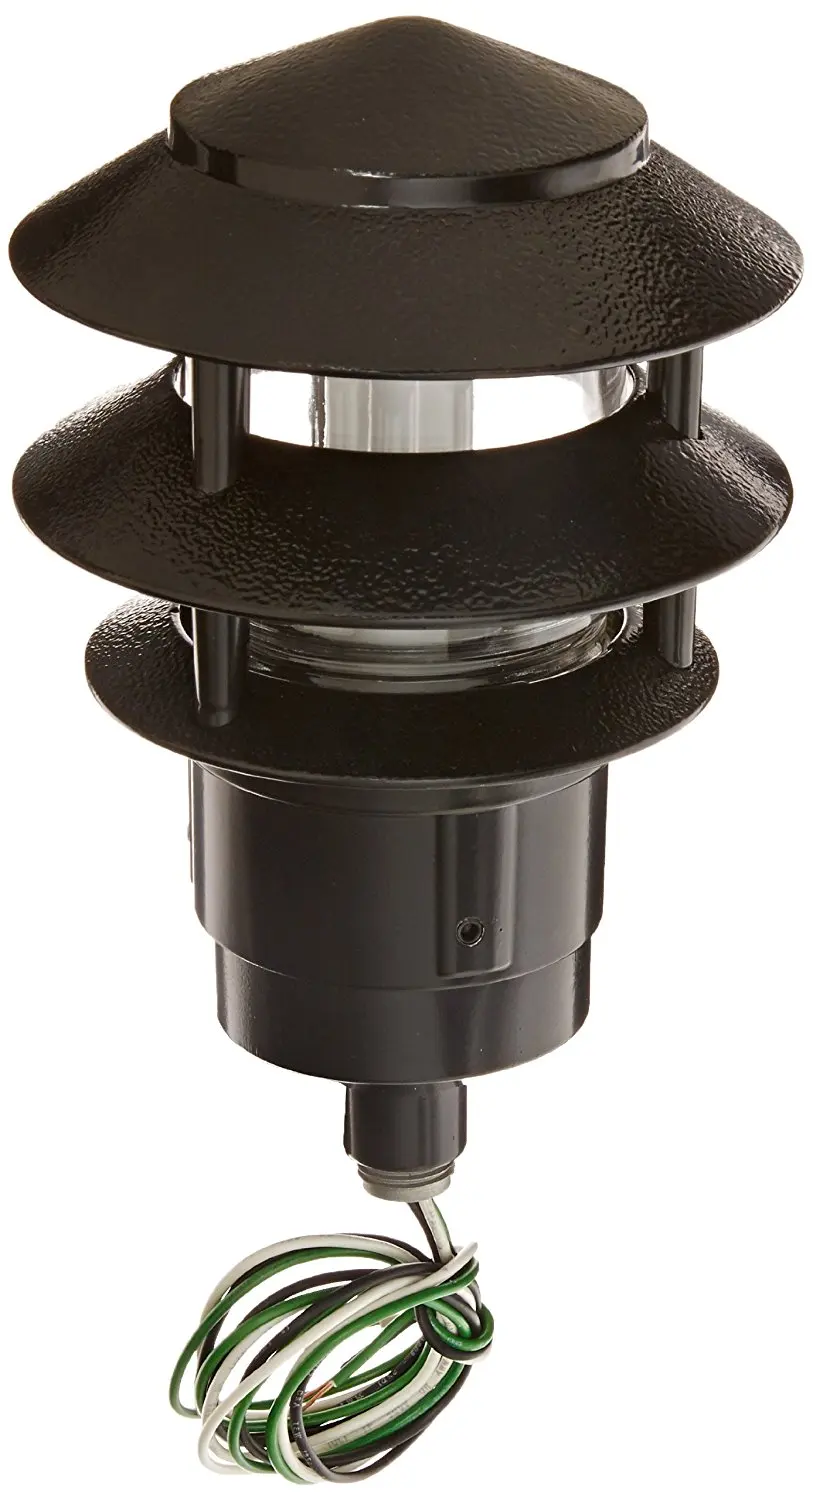 RAB Lighting LLD4B Incandescent 4 Tier Lawn Light with Dome Cap 1650 Lumens A-19 Type Black 100W Power 120VAC